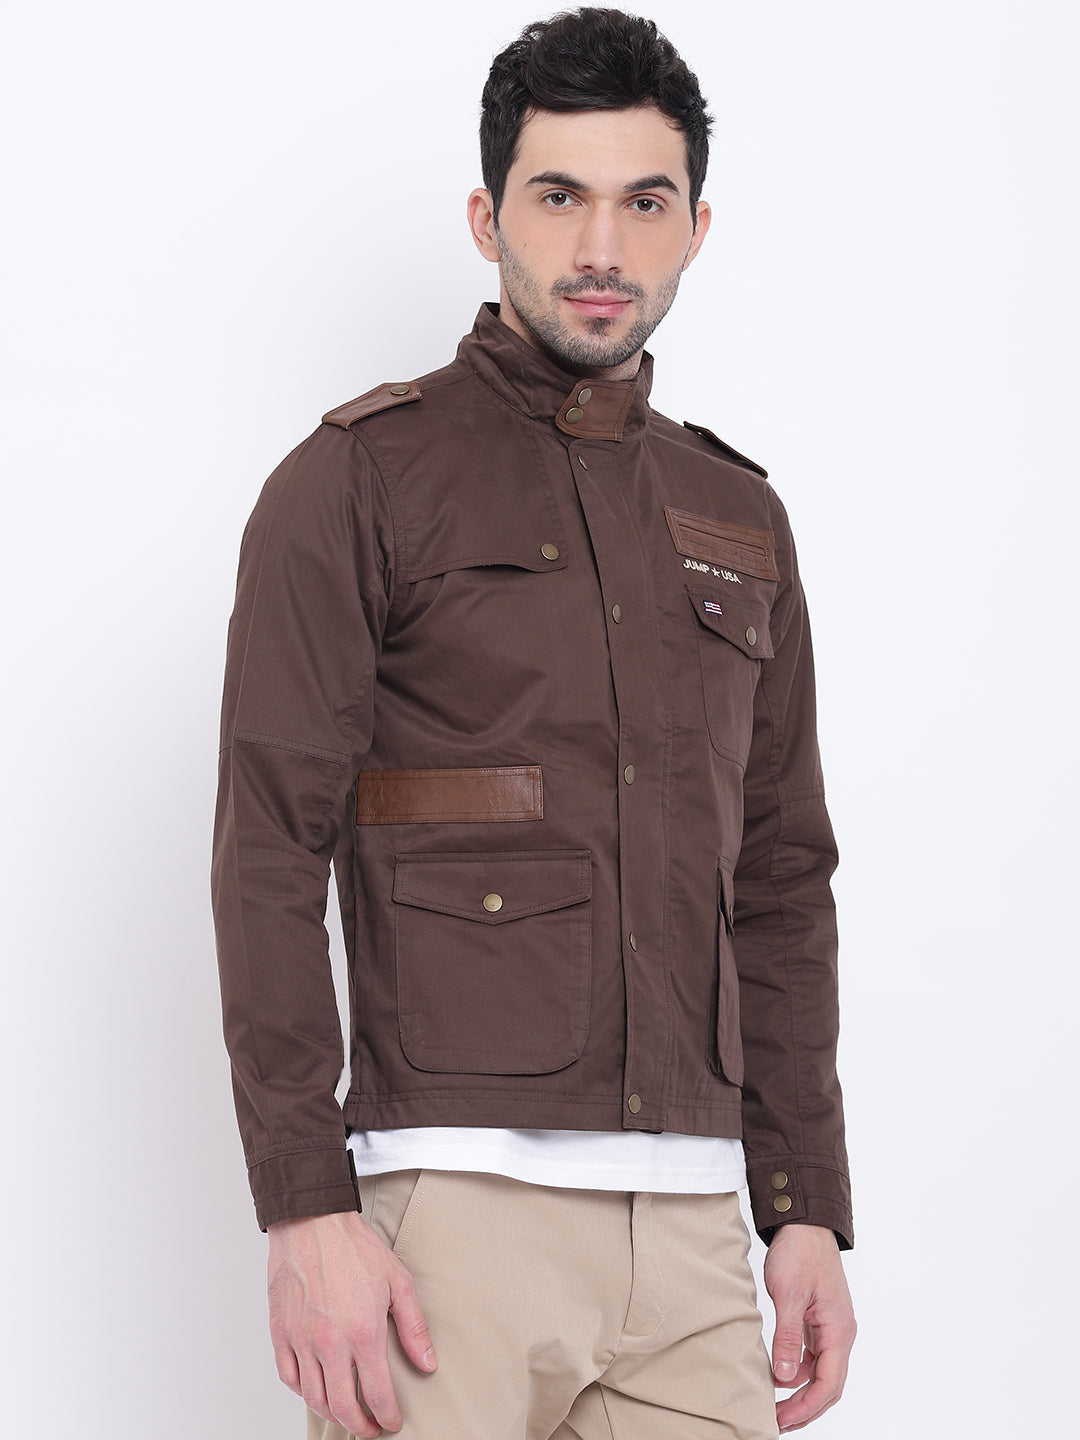 Men Casual Solid Brown Tailored Jacket - JUMP USA